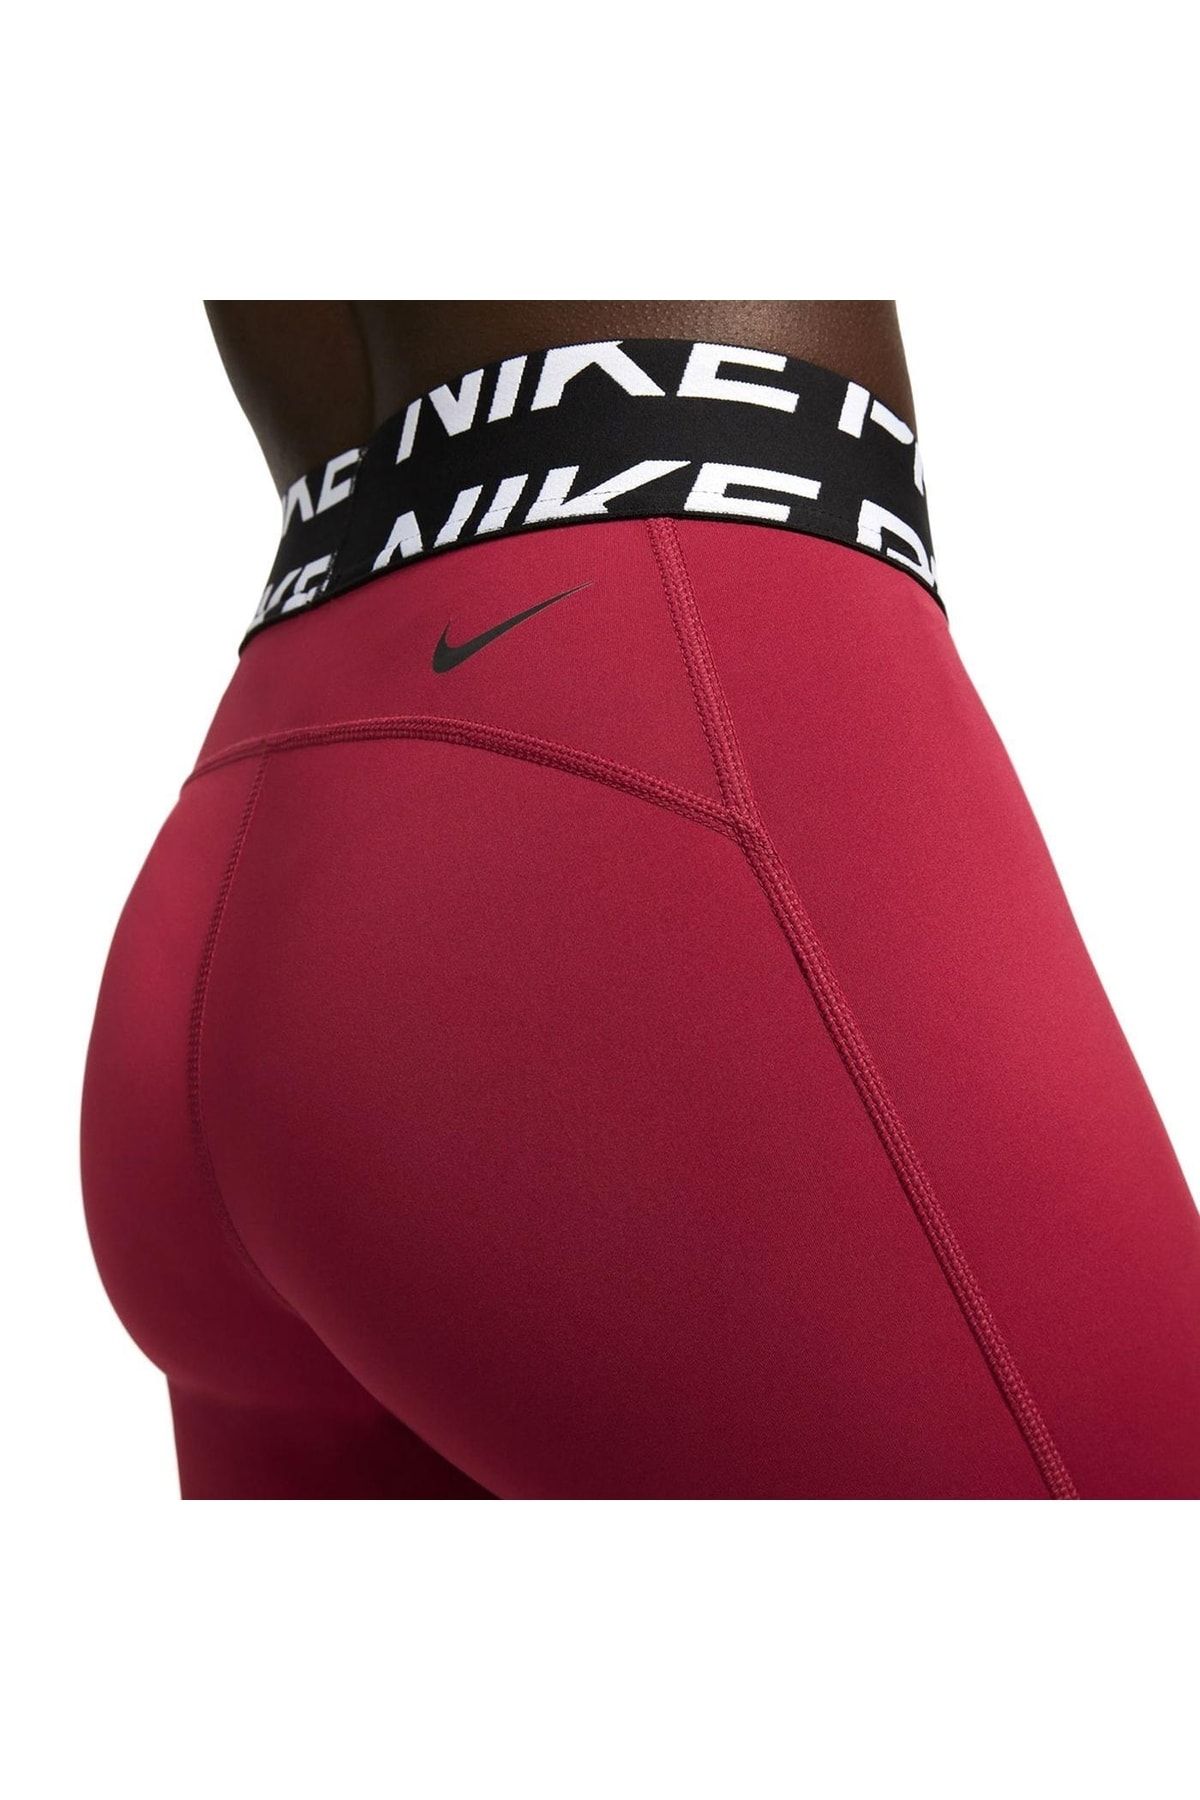 Nike Pro Training Crossover leggings in Black & Pink, Men's Fashion,  Activewear on Carousell